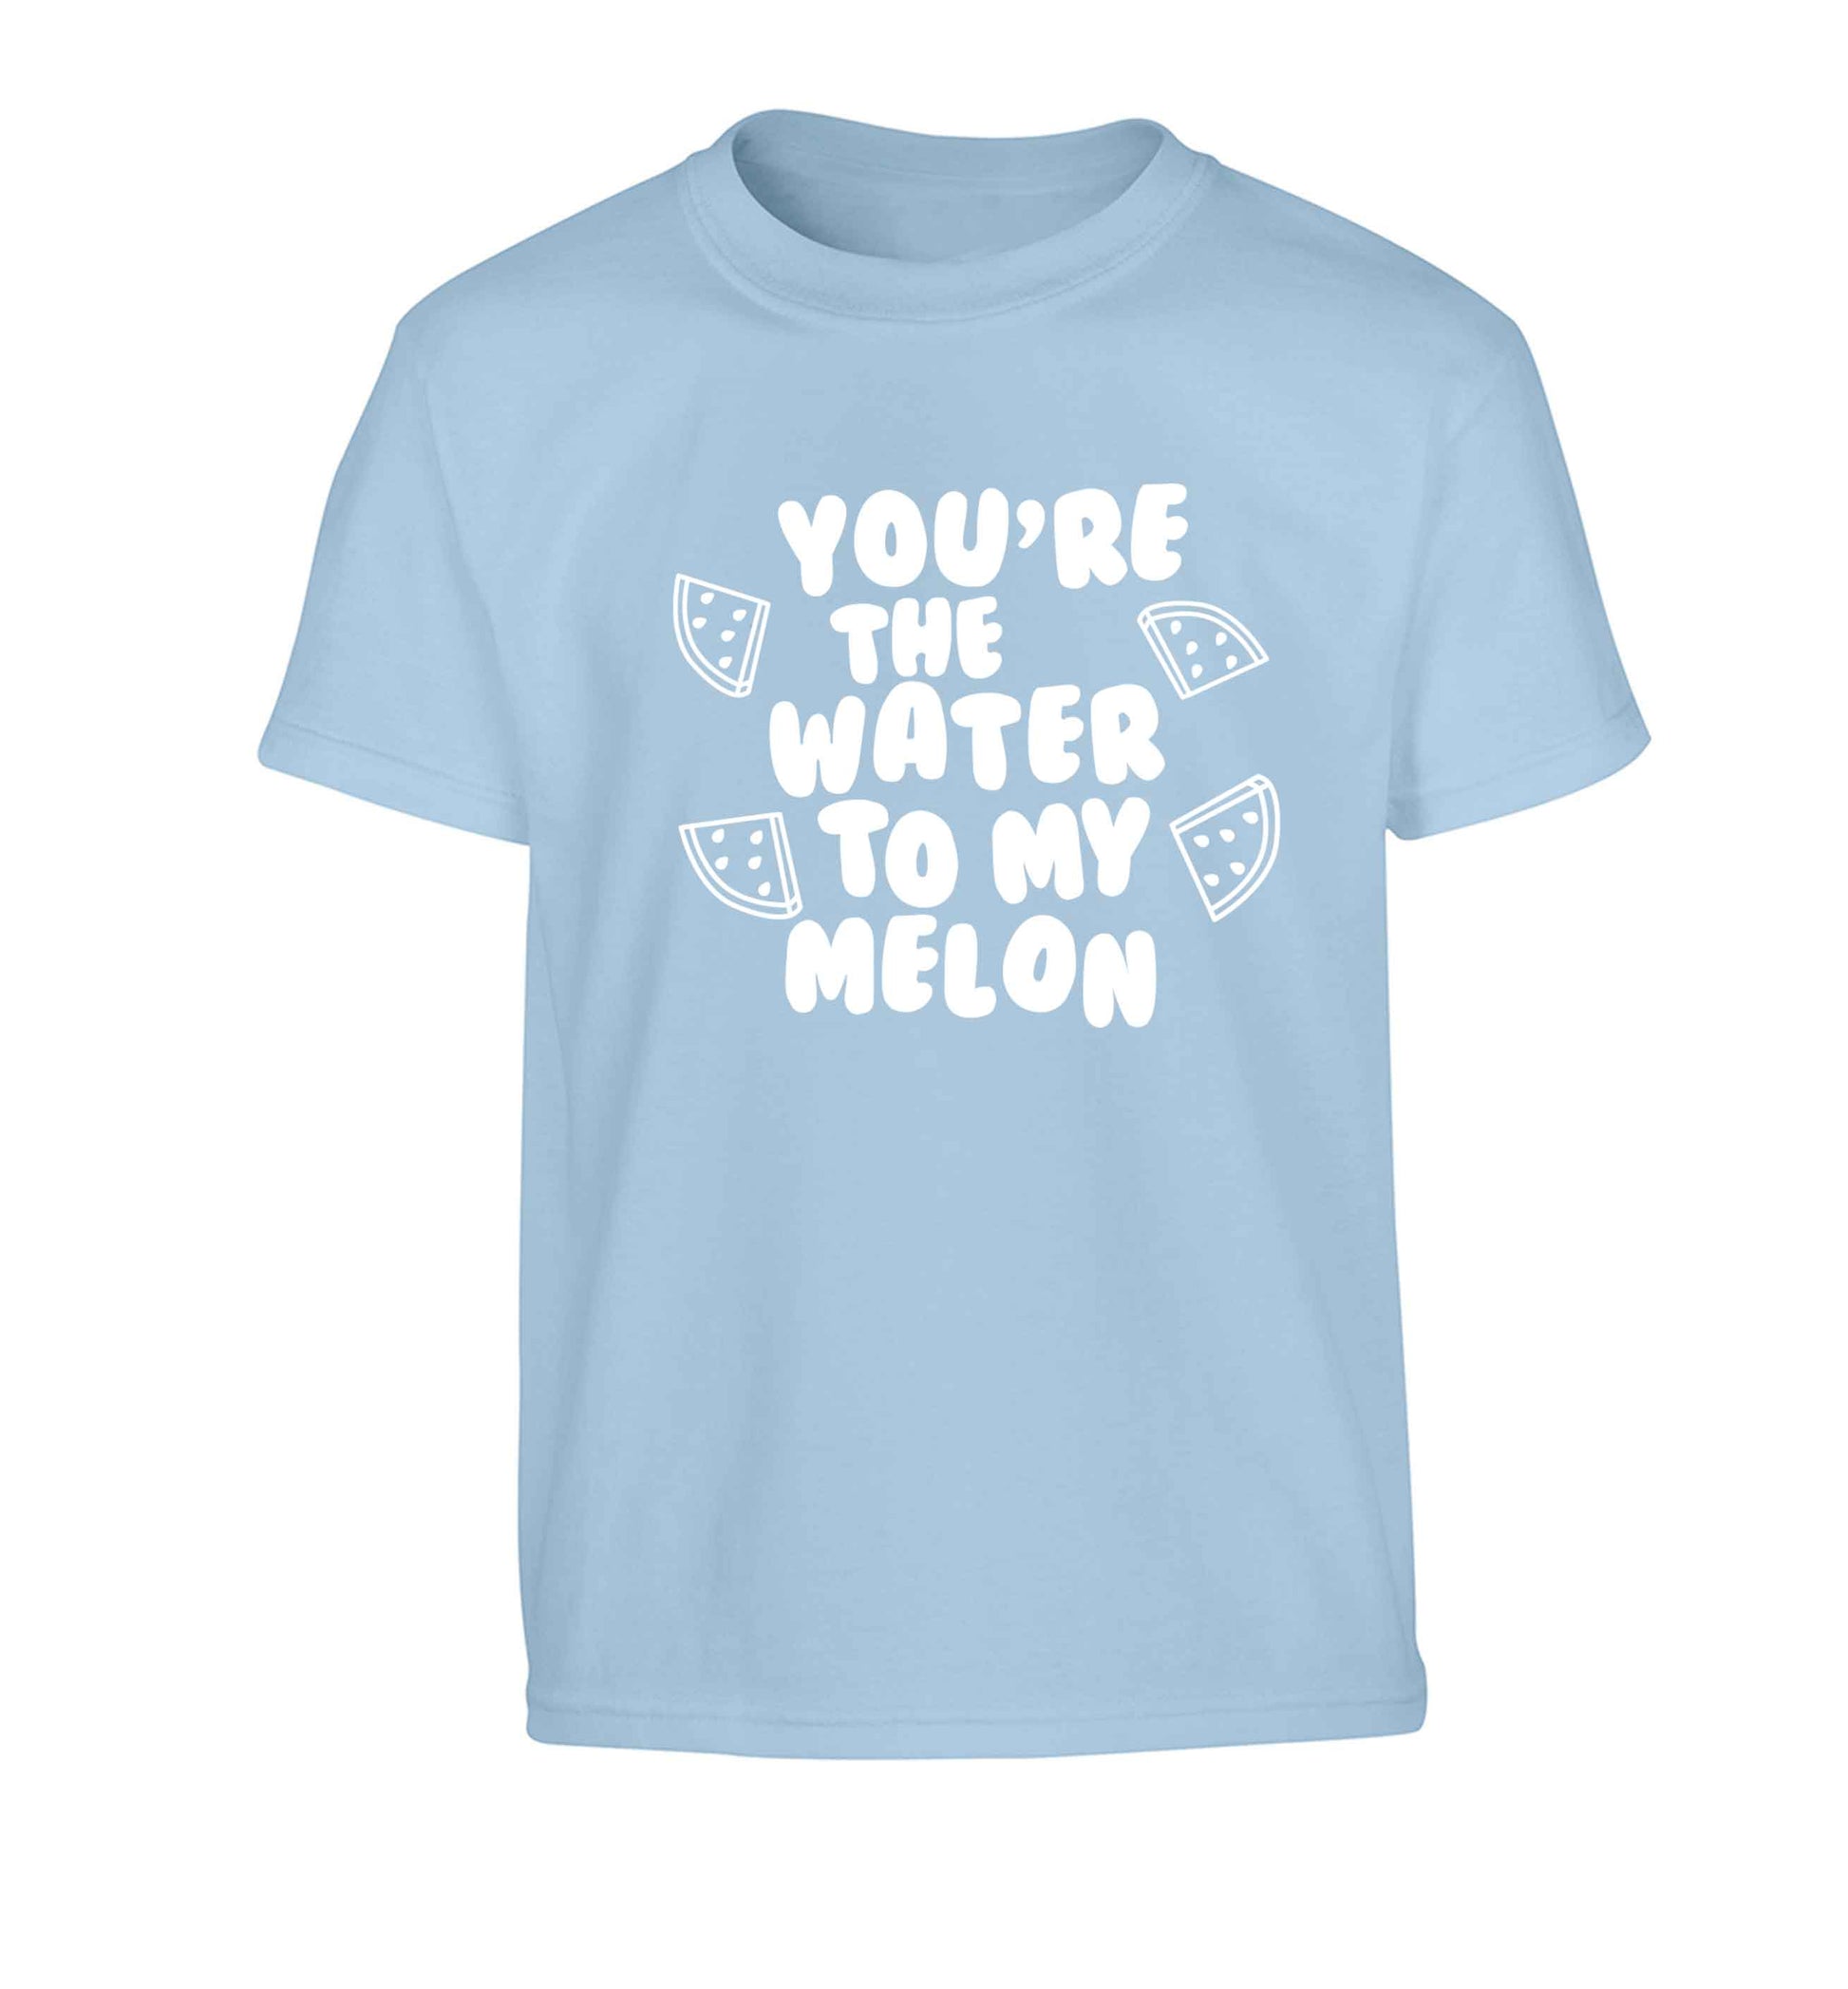 You're the water to my melon Children's light blue Tshirt 12-13 Years